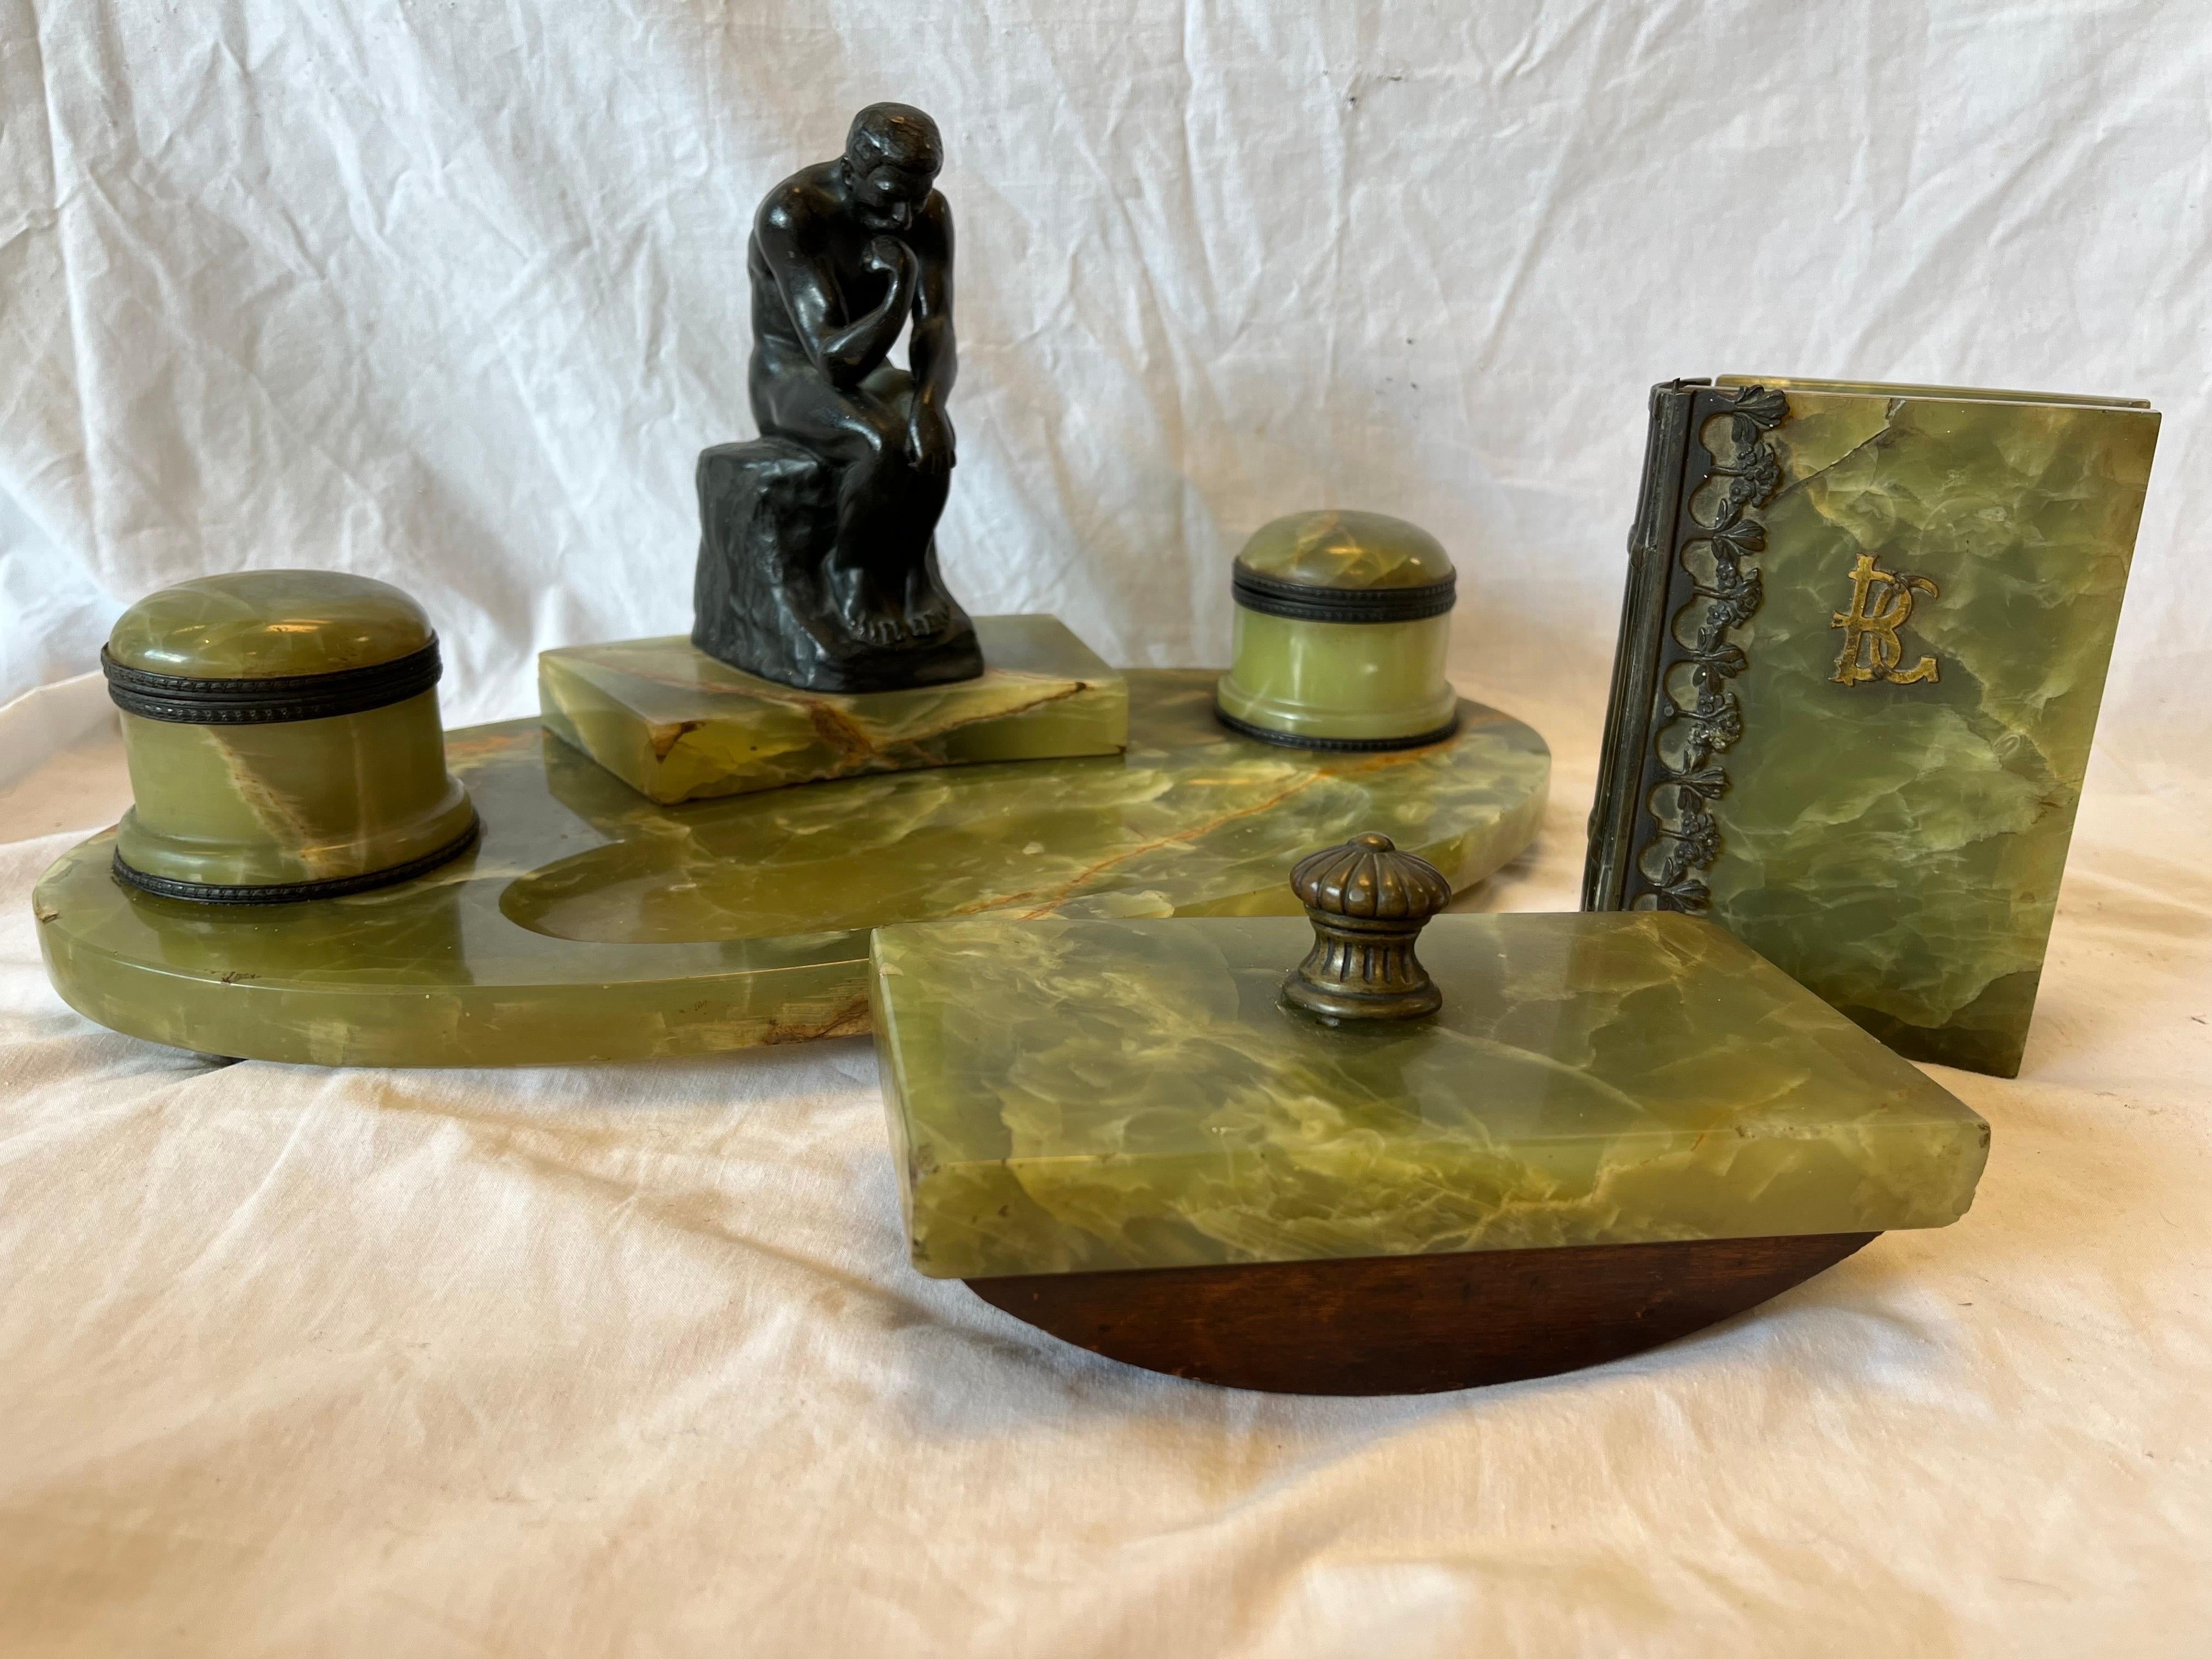 A fine and antique onyx and bronze desk set featuring a sculpture of Rodin's Thinker done by Hungarian sculptor Andor Ruff. From the AskArt website, 